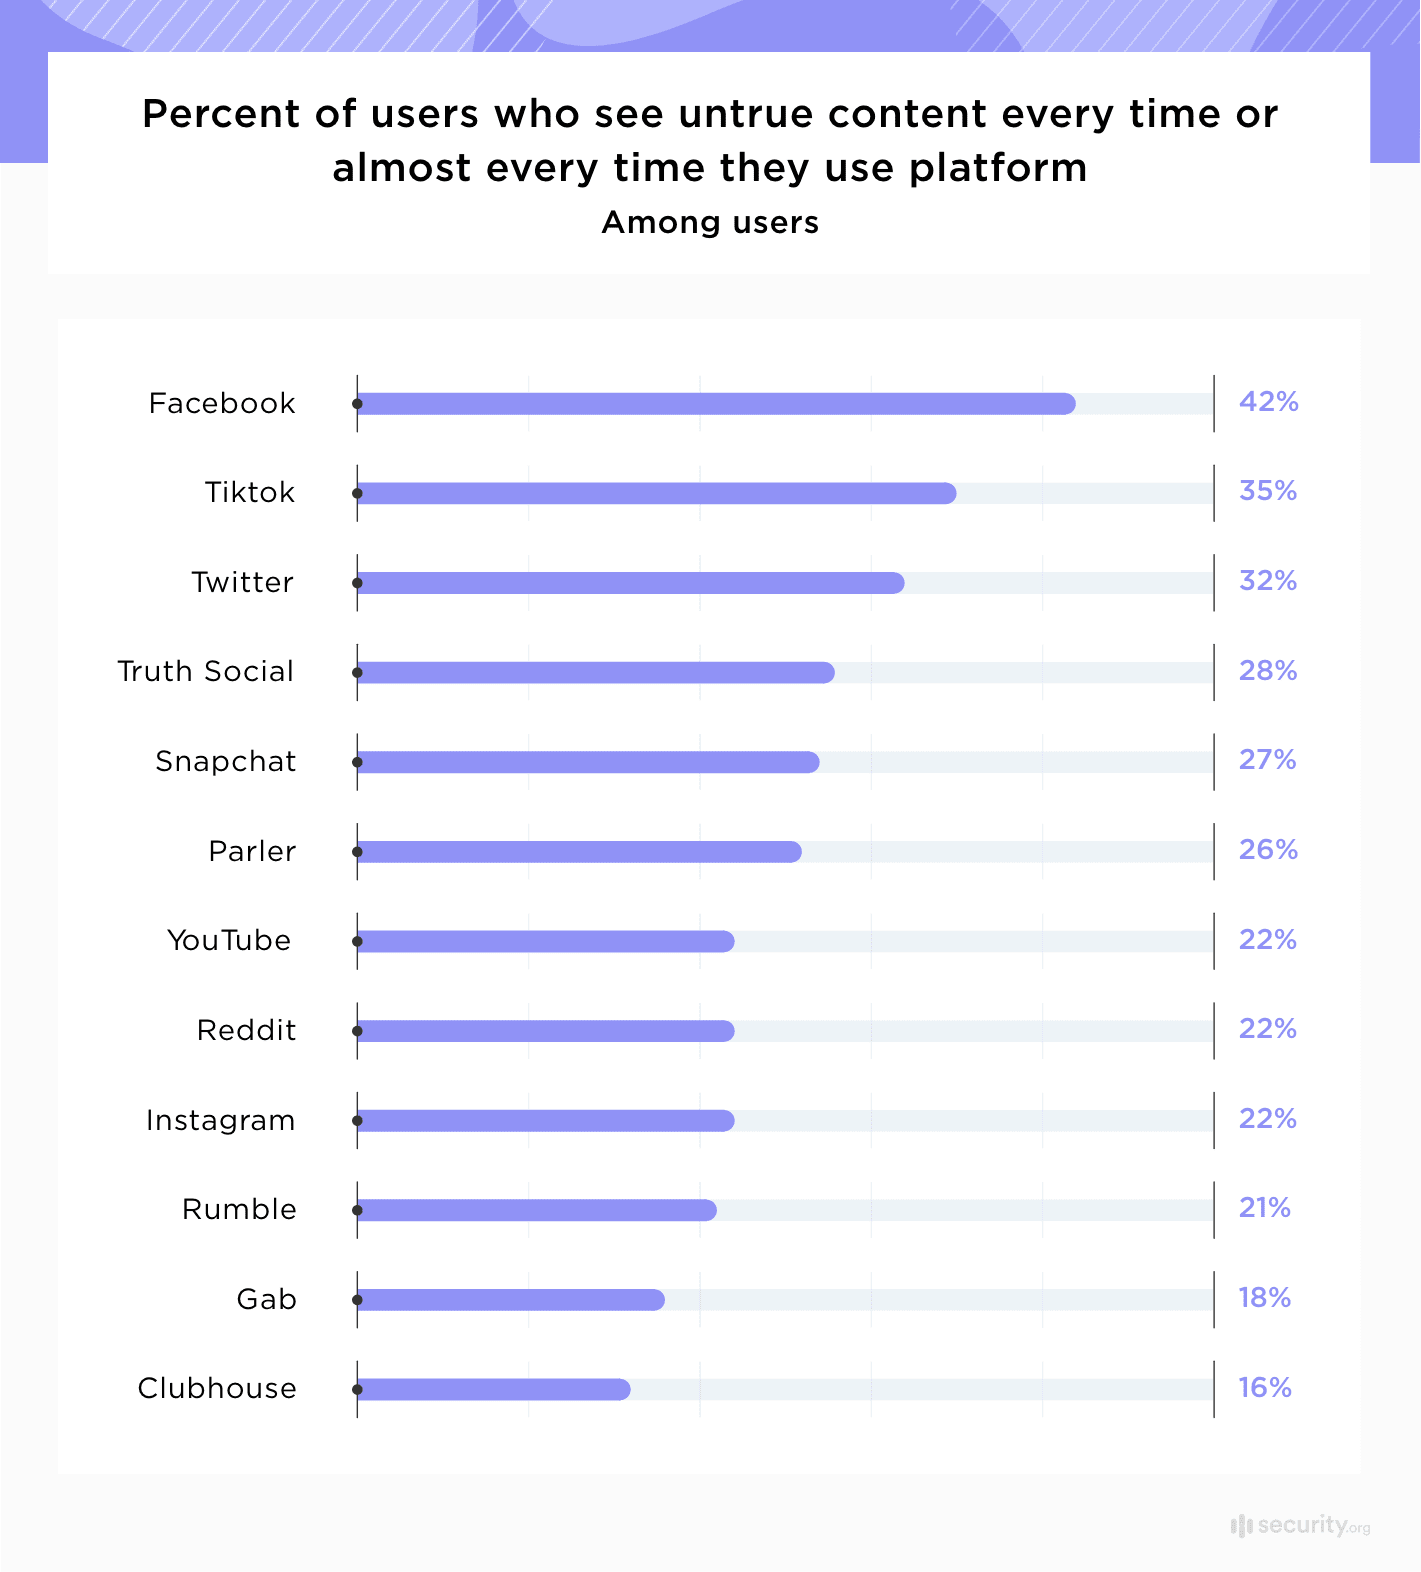 Percent of users who see untrue content every time or almost every time they use platform